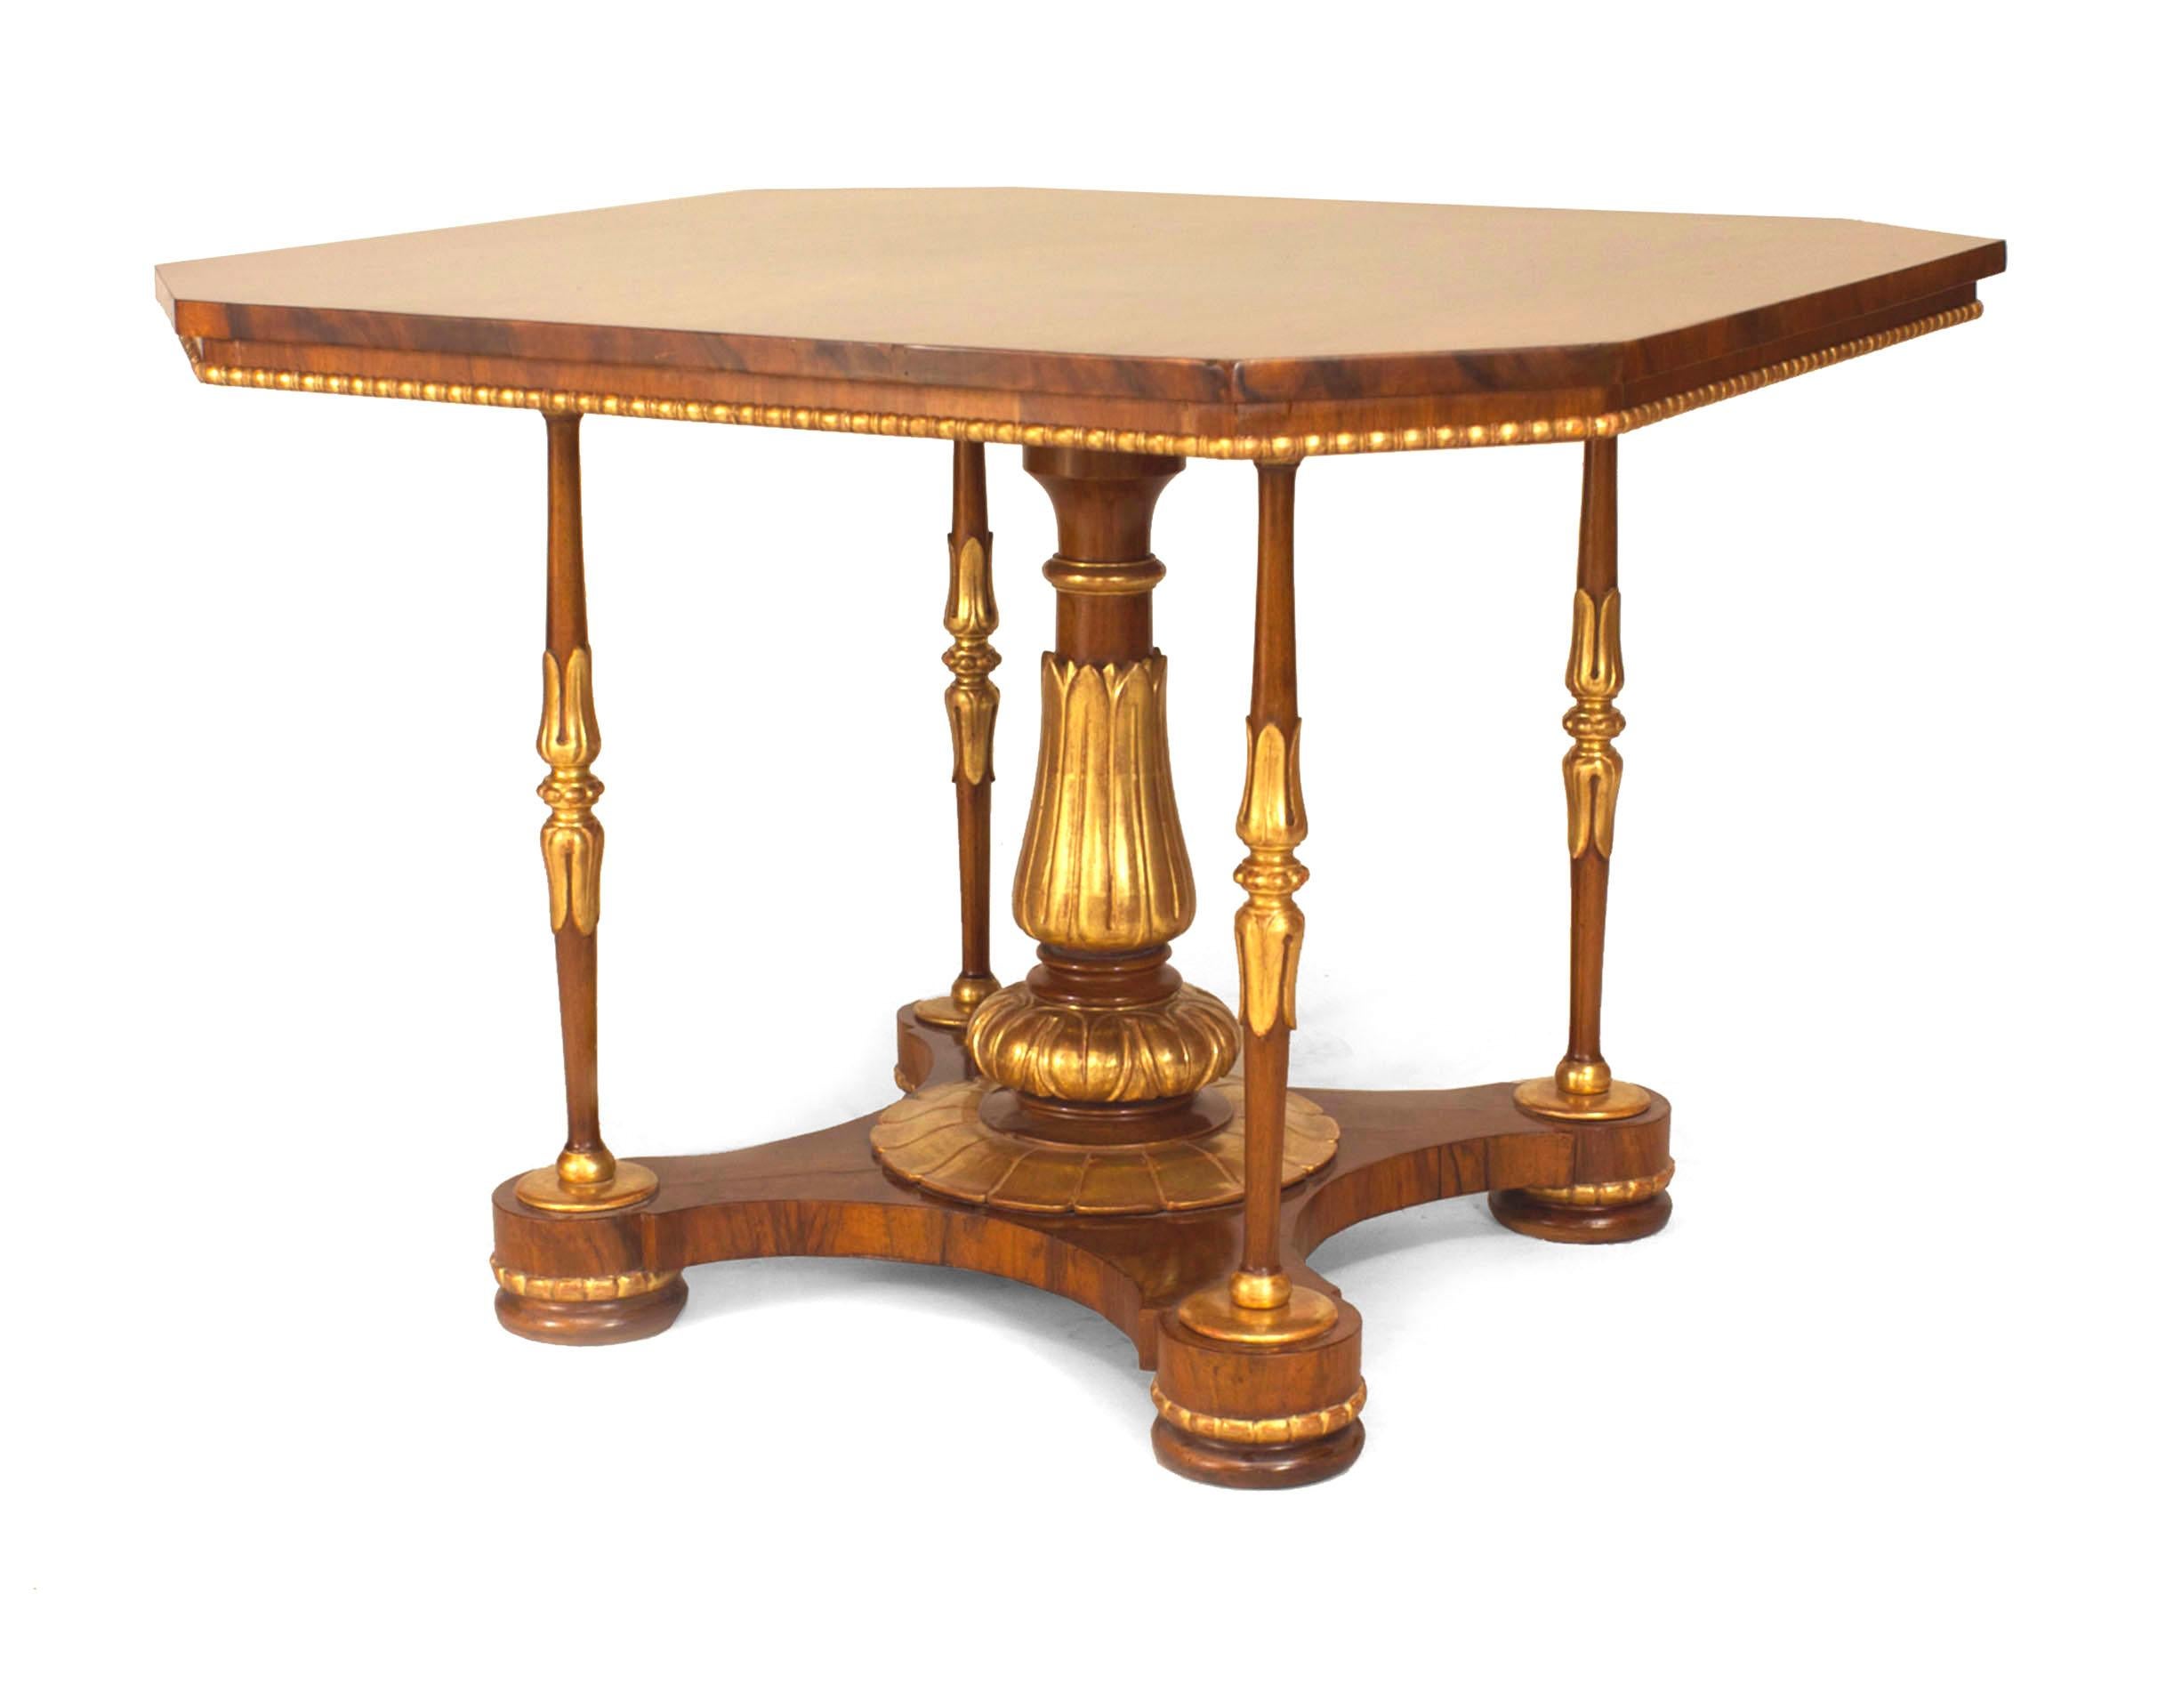 English Regency (circa 1850s) walnut & gilt trimmed center table with a square top & canted corners supported on a centered pedestal & 4 corner columns on a platform base (attributed to MOREL & SEDDON).
